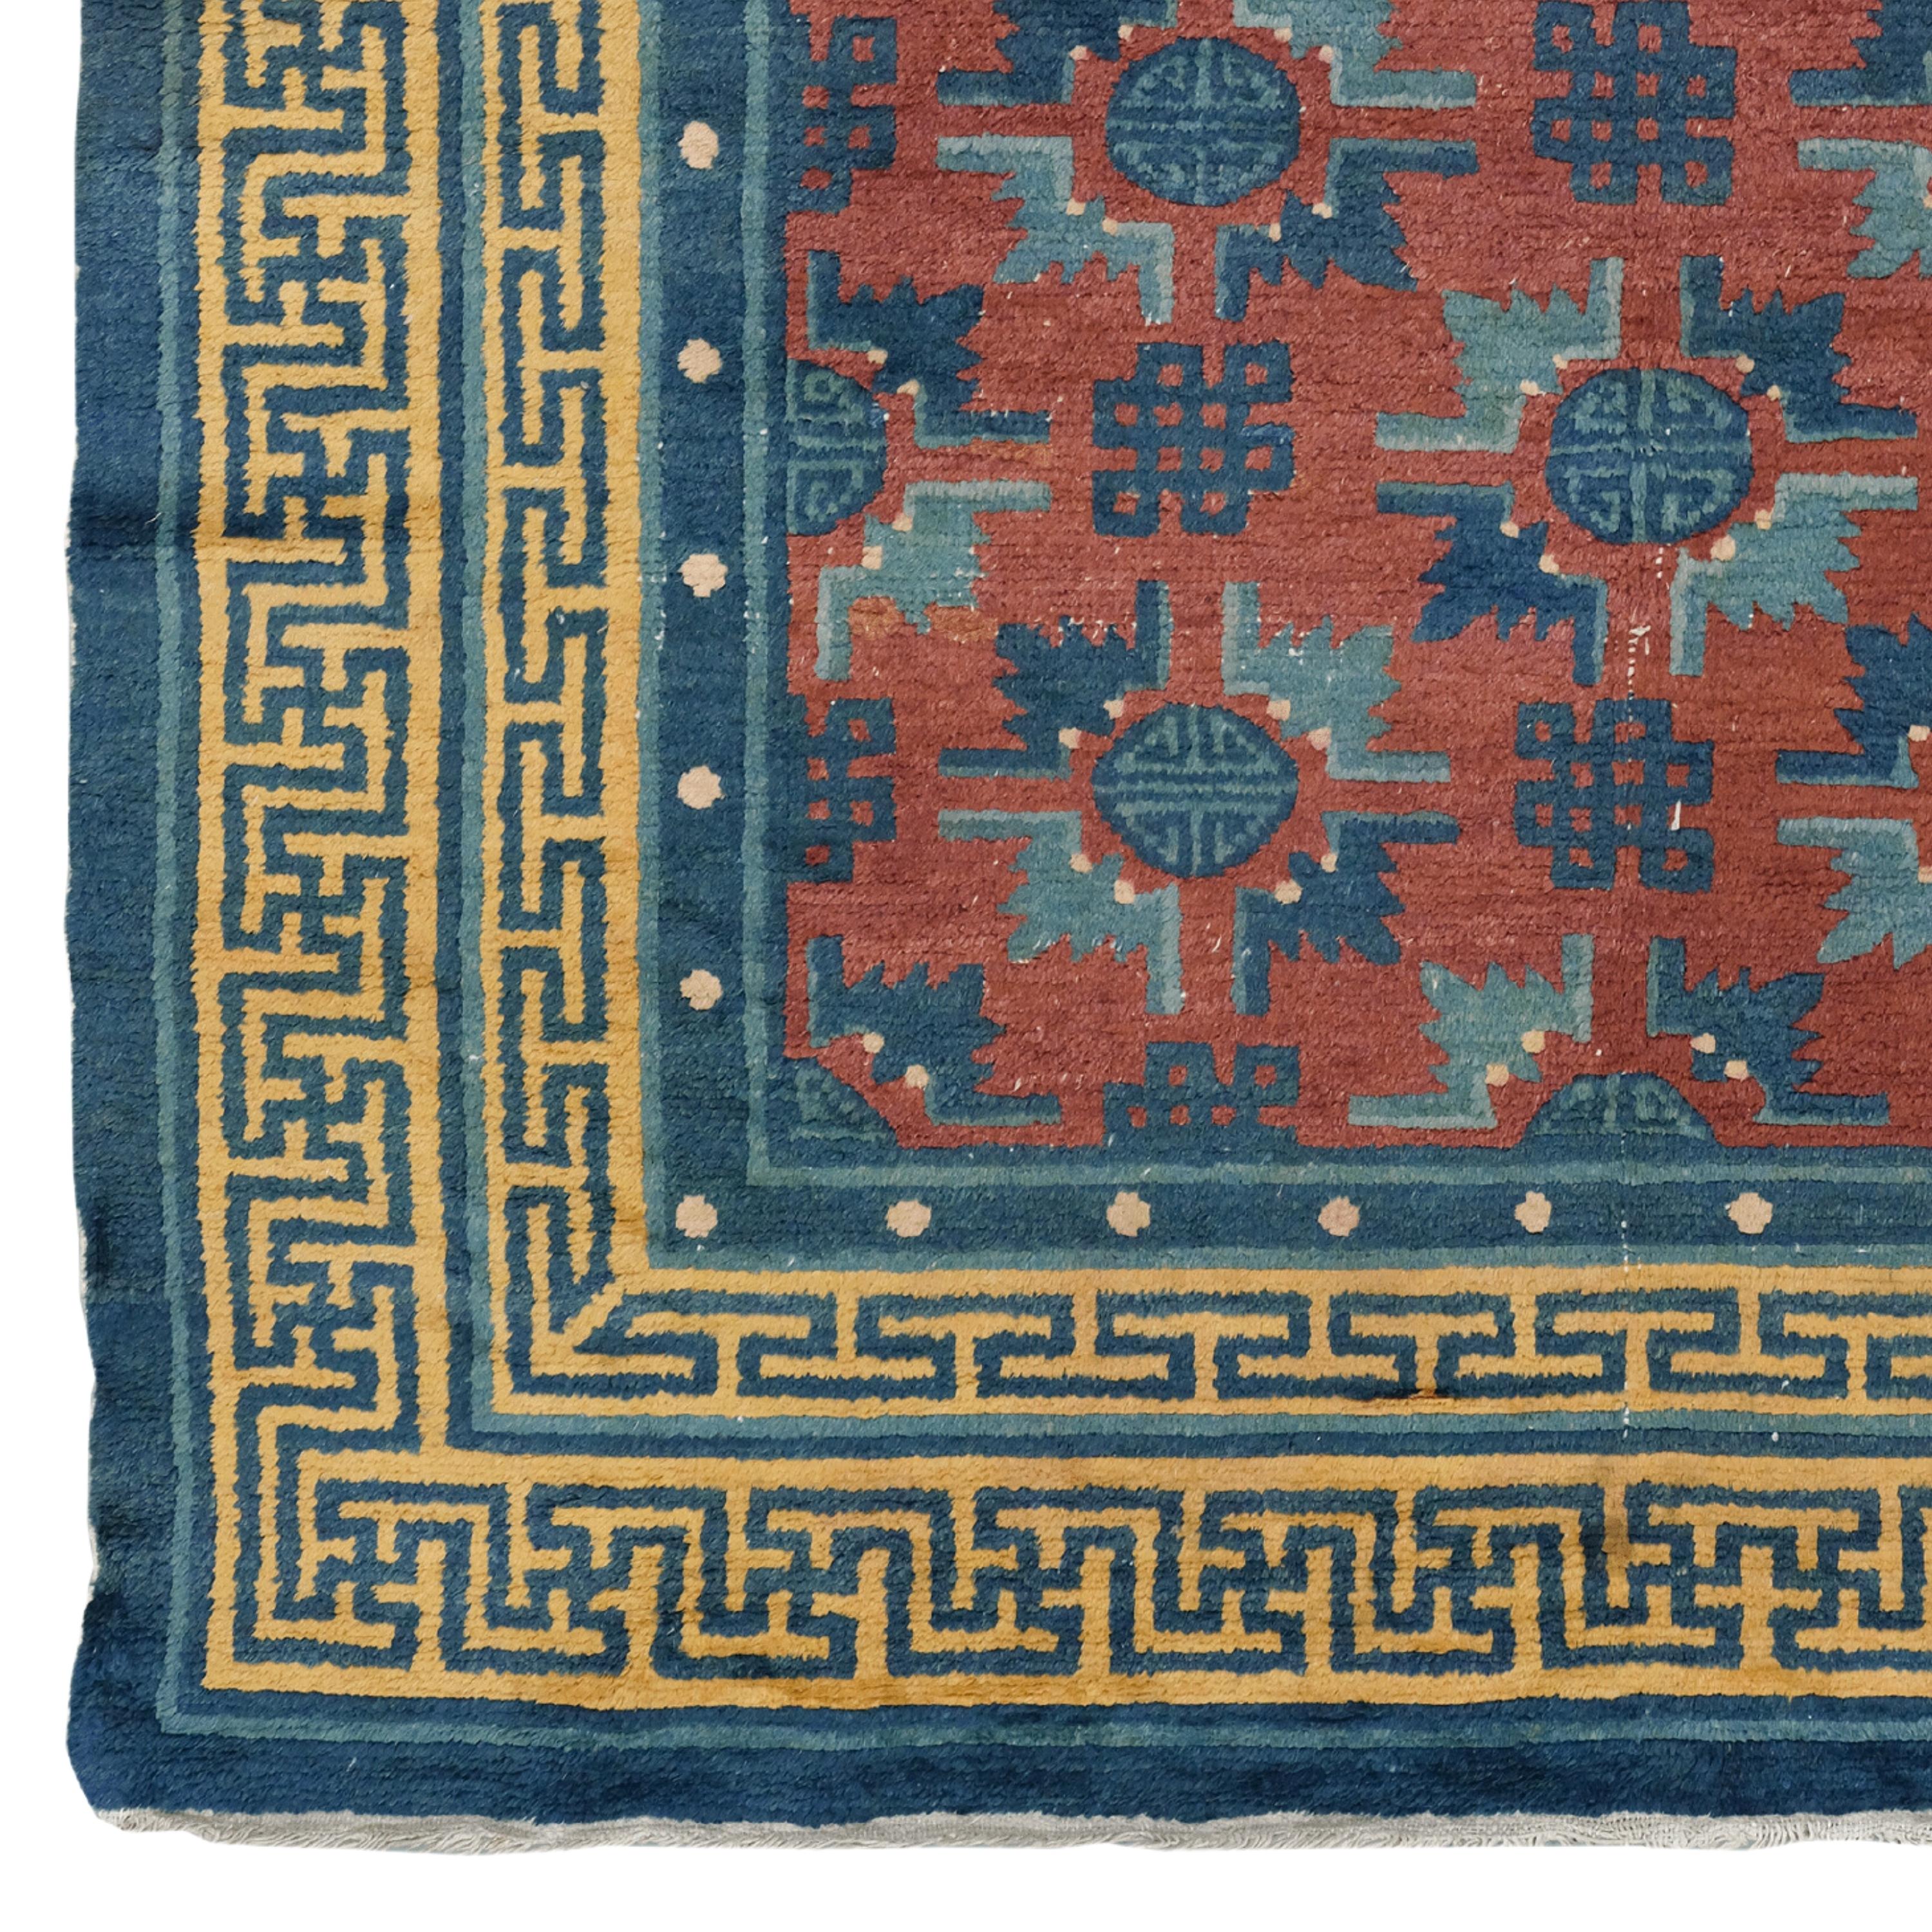 Antique Chinese Rug  Central Asia Rug
19th Century Chinese Rug
Size: 132x180 cm

This carpet is a work of art woven in China in the late 19th or early 20th century. The dimensions of the carpet are 1.32 x 1.80 meters and it is made of a mixture of